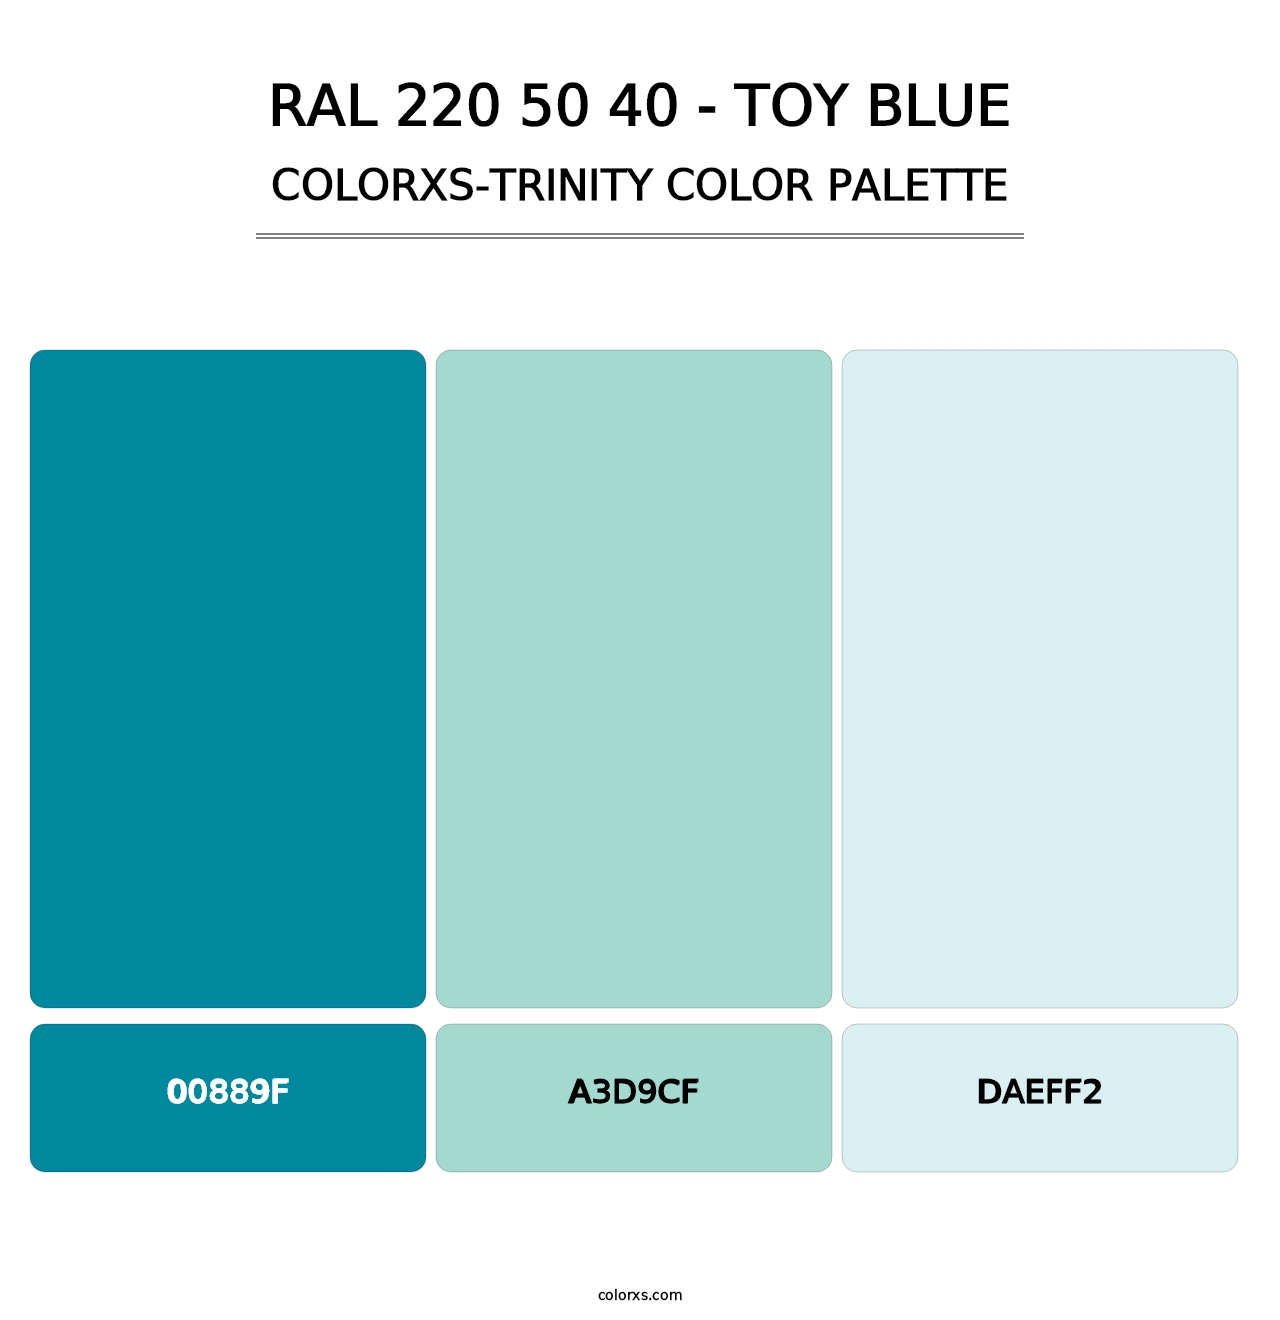 RAL 220 50 40 - Toy Blue - Colorxs Trinity Palette